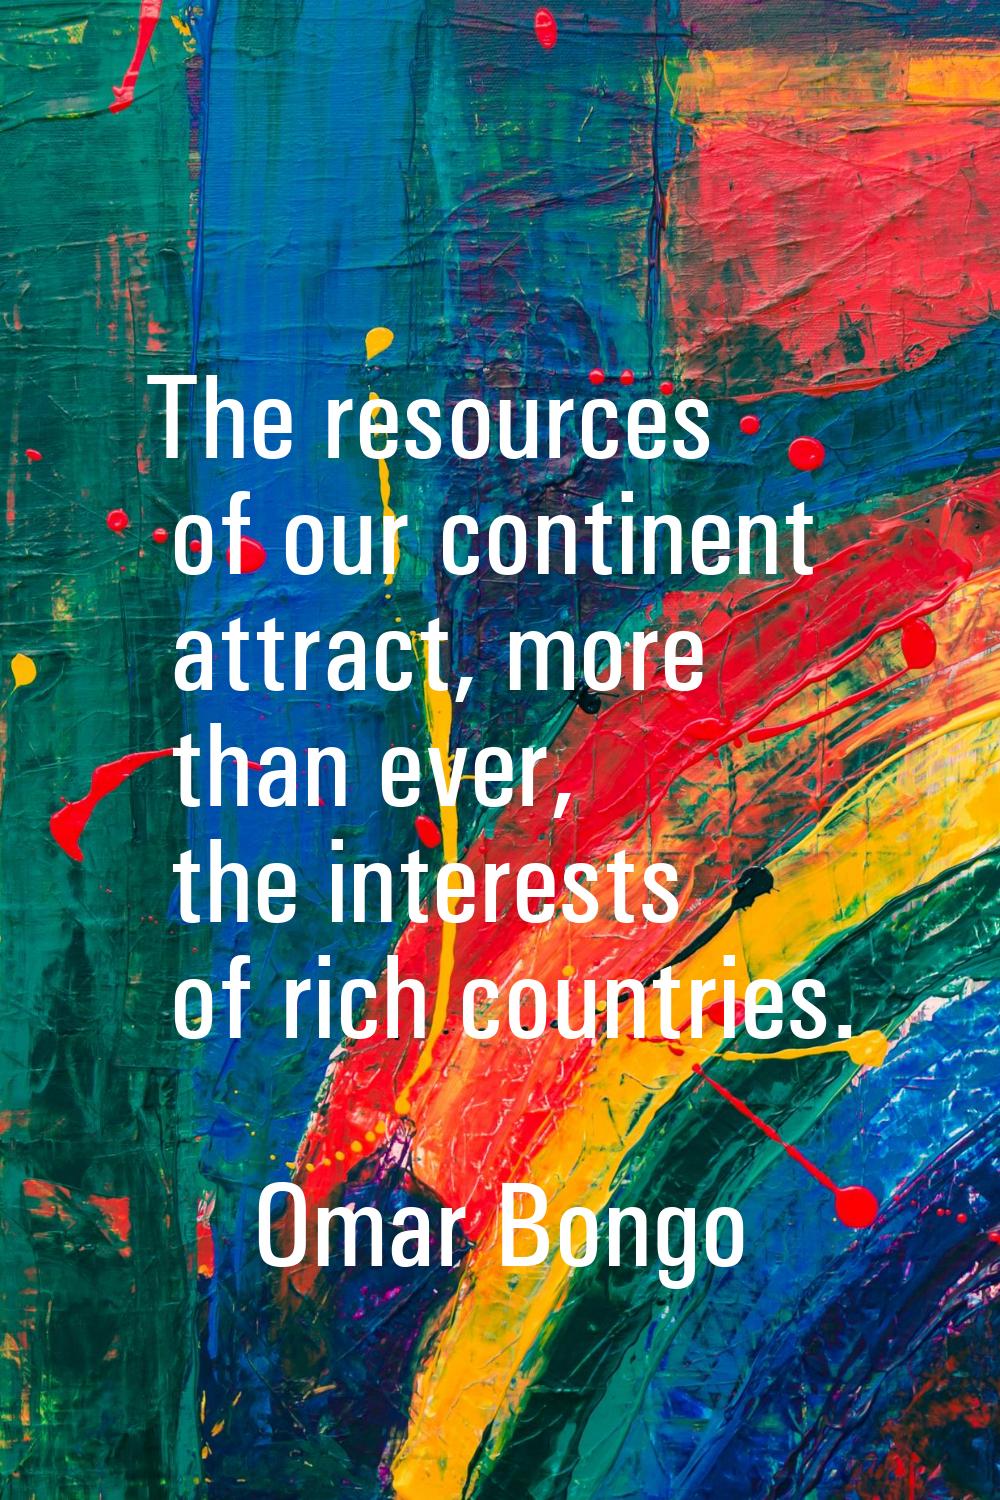 The resources of our continent attract, more than ever, the interests of rich countries.